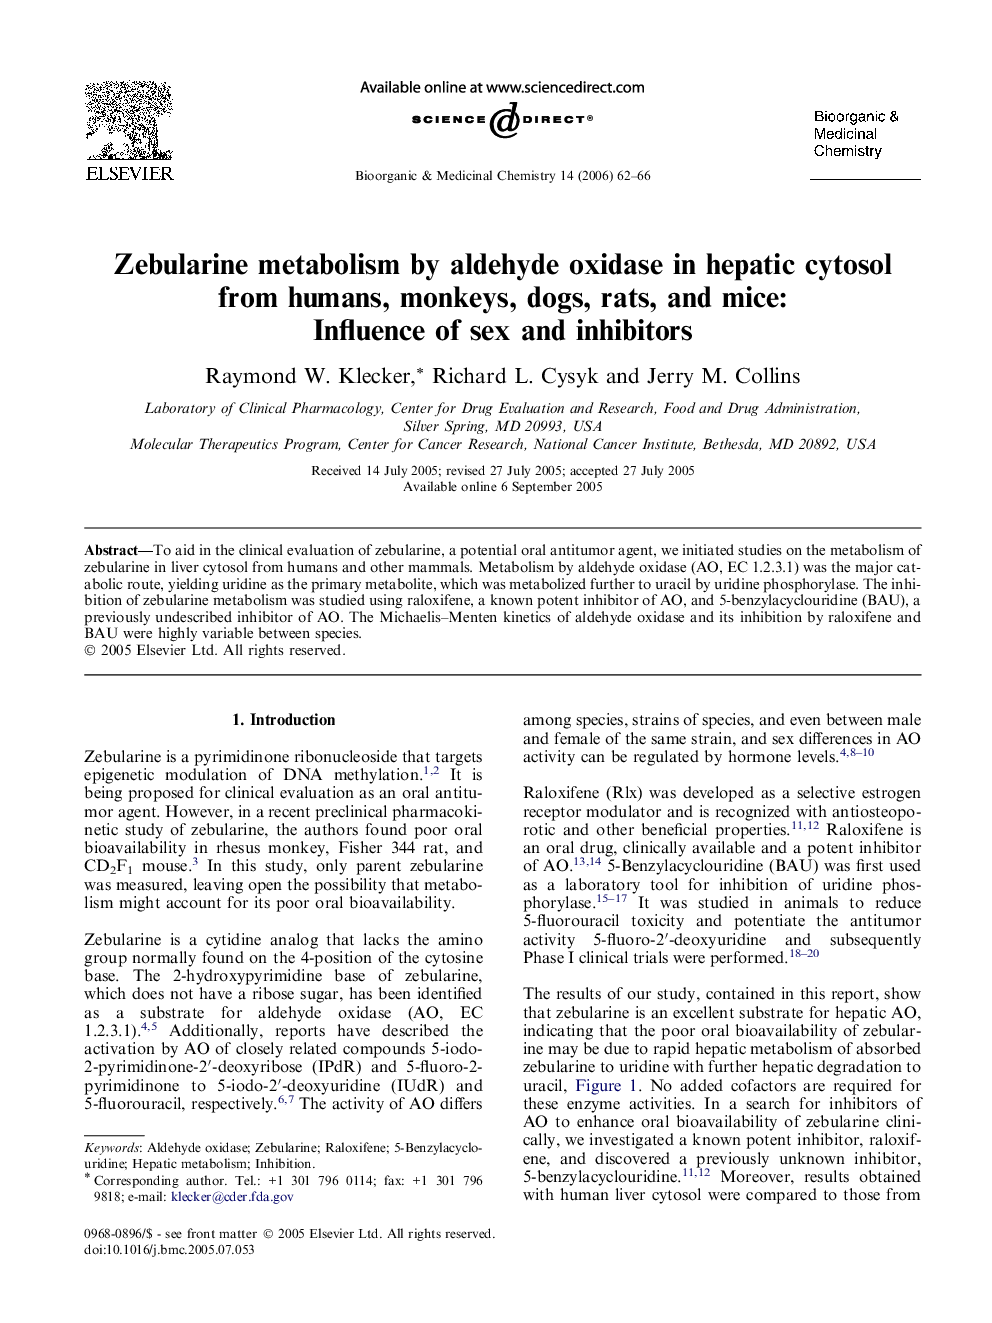 Zebularine metabolism by aldehyde oxidase in hepatic cytosol from humans, monkeys, dogs, rats, and mice: Influence of sex and inhibitors